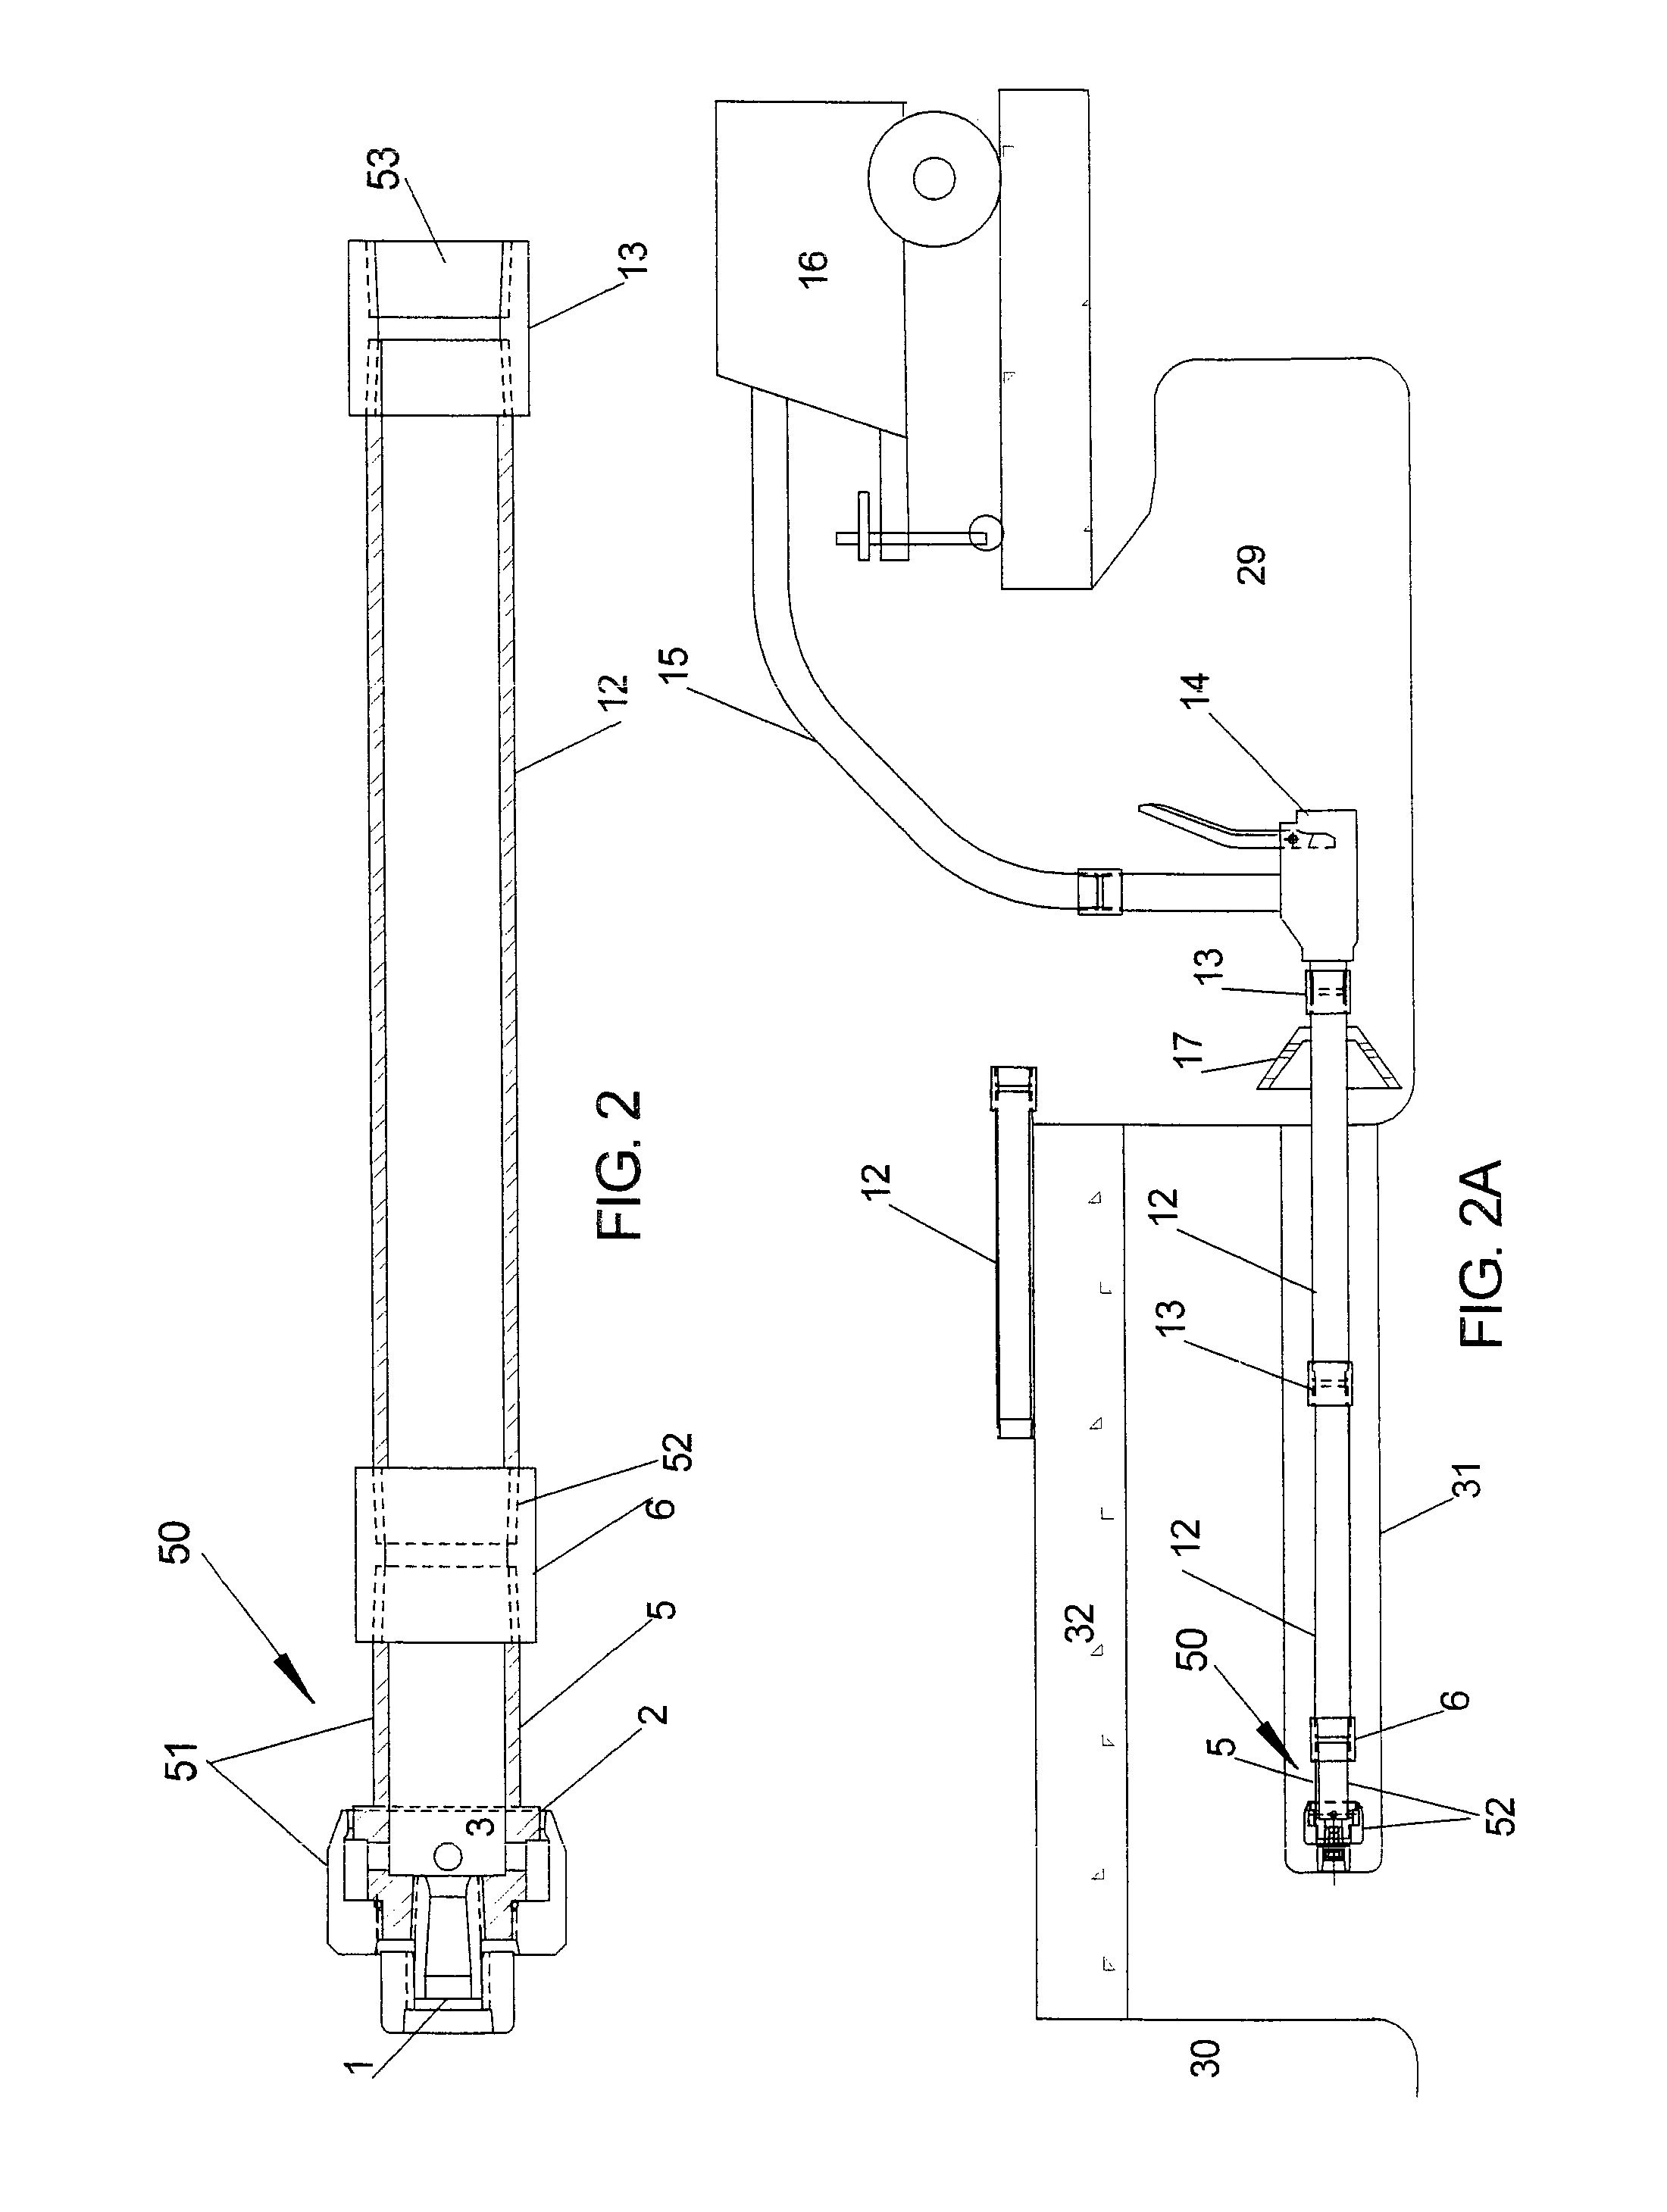 Method and apparatus for pneumatic excavation